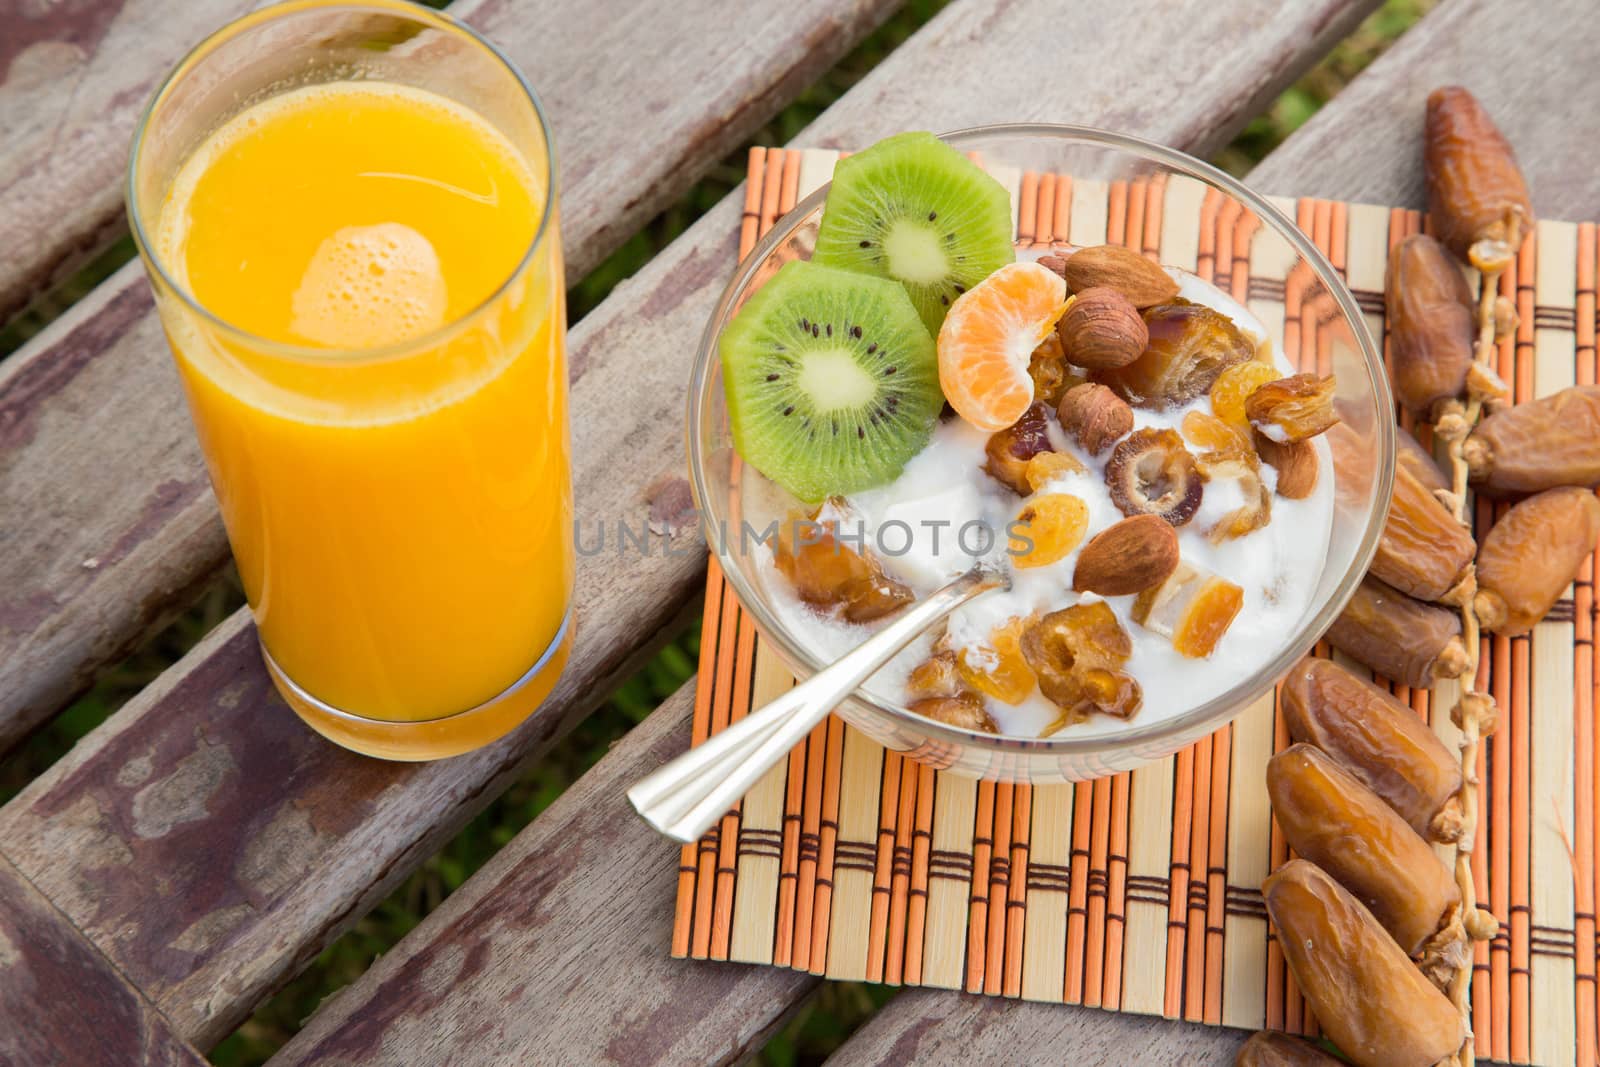 Healthy breakfast: a glass of fresh orange juice and a dish of yogourt with fruits